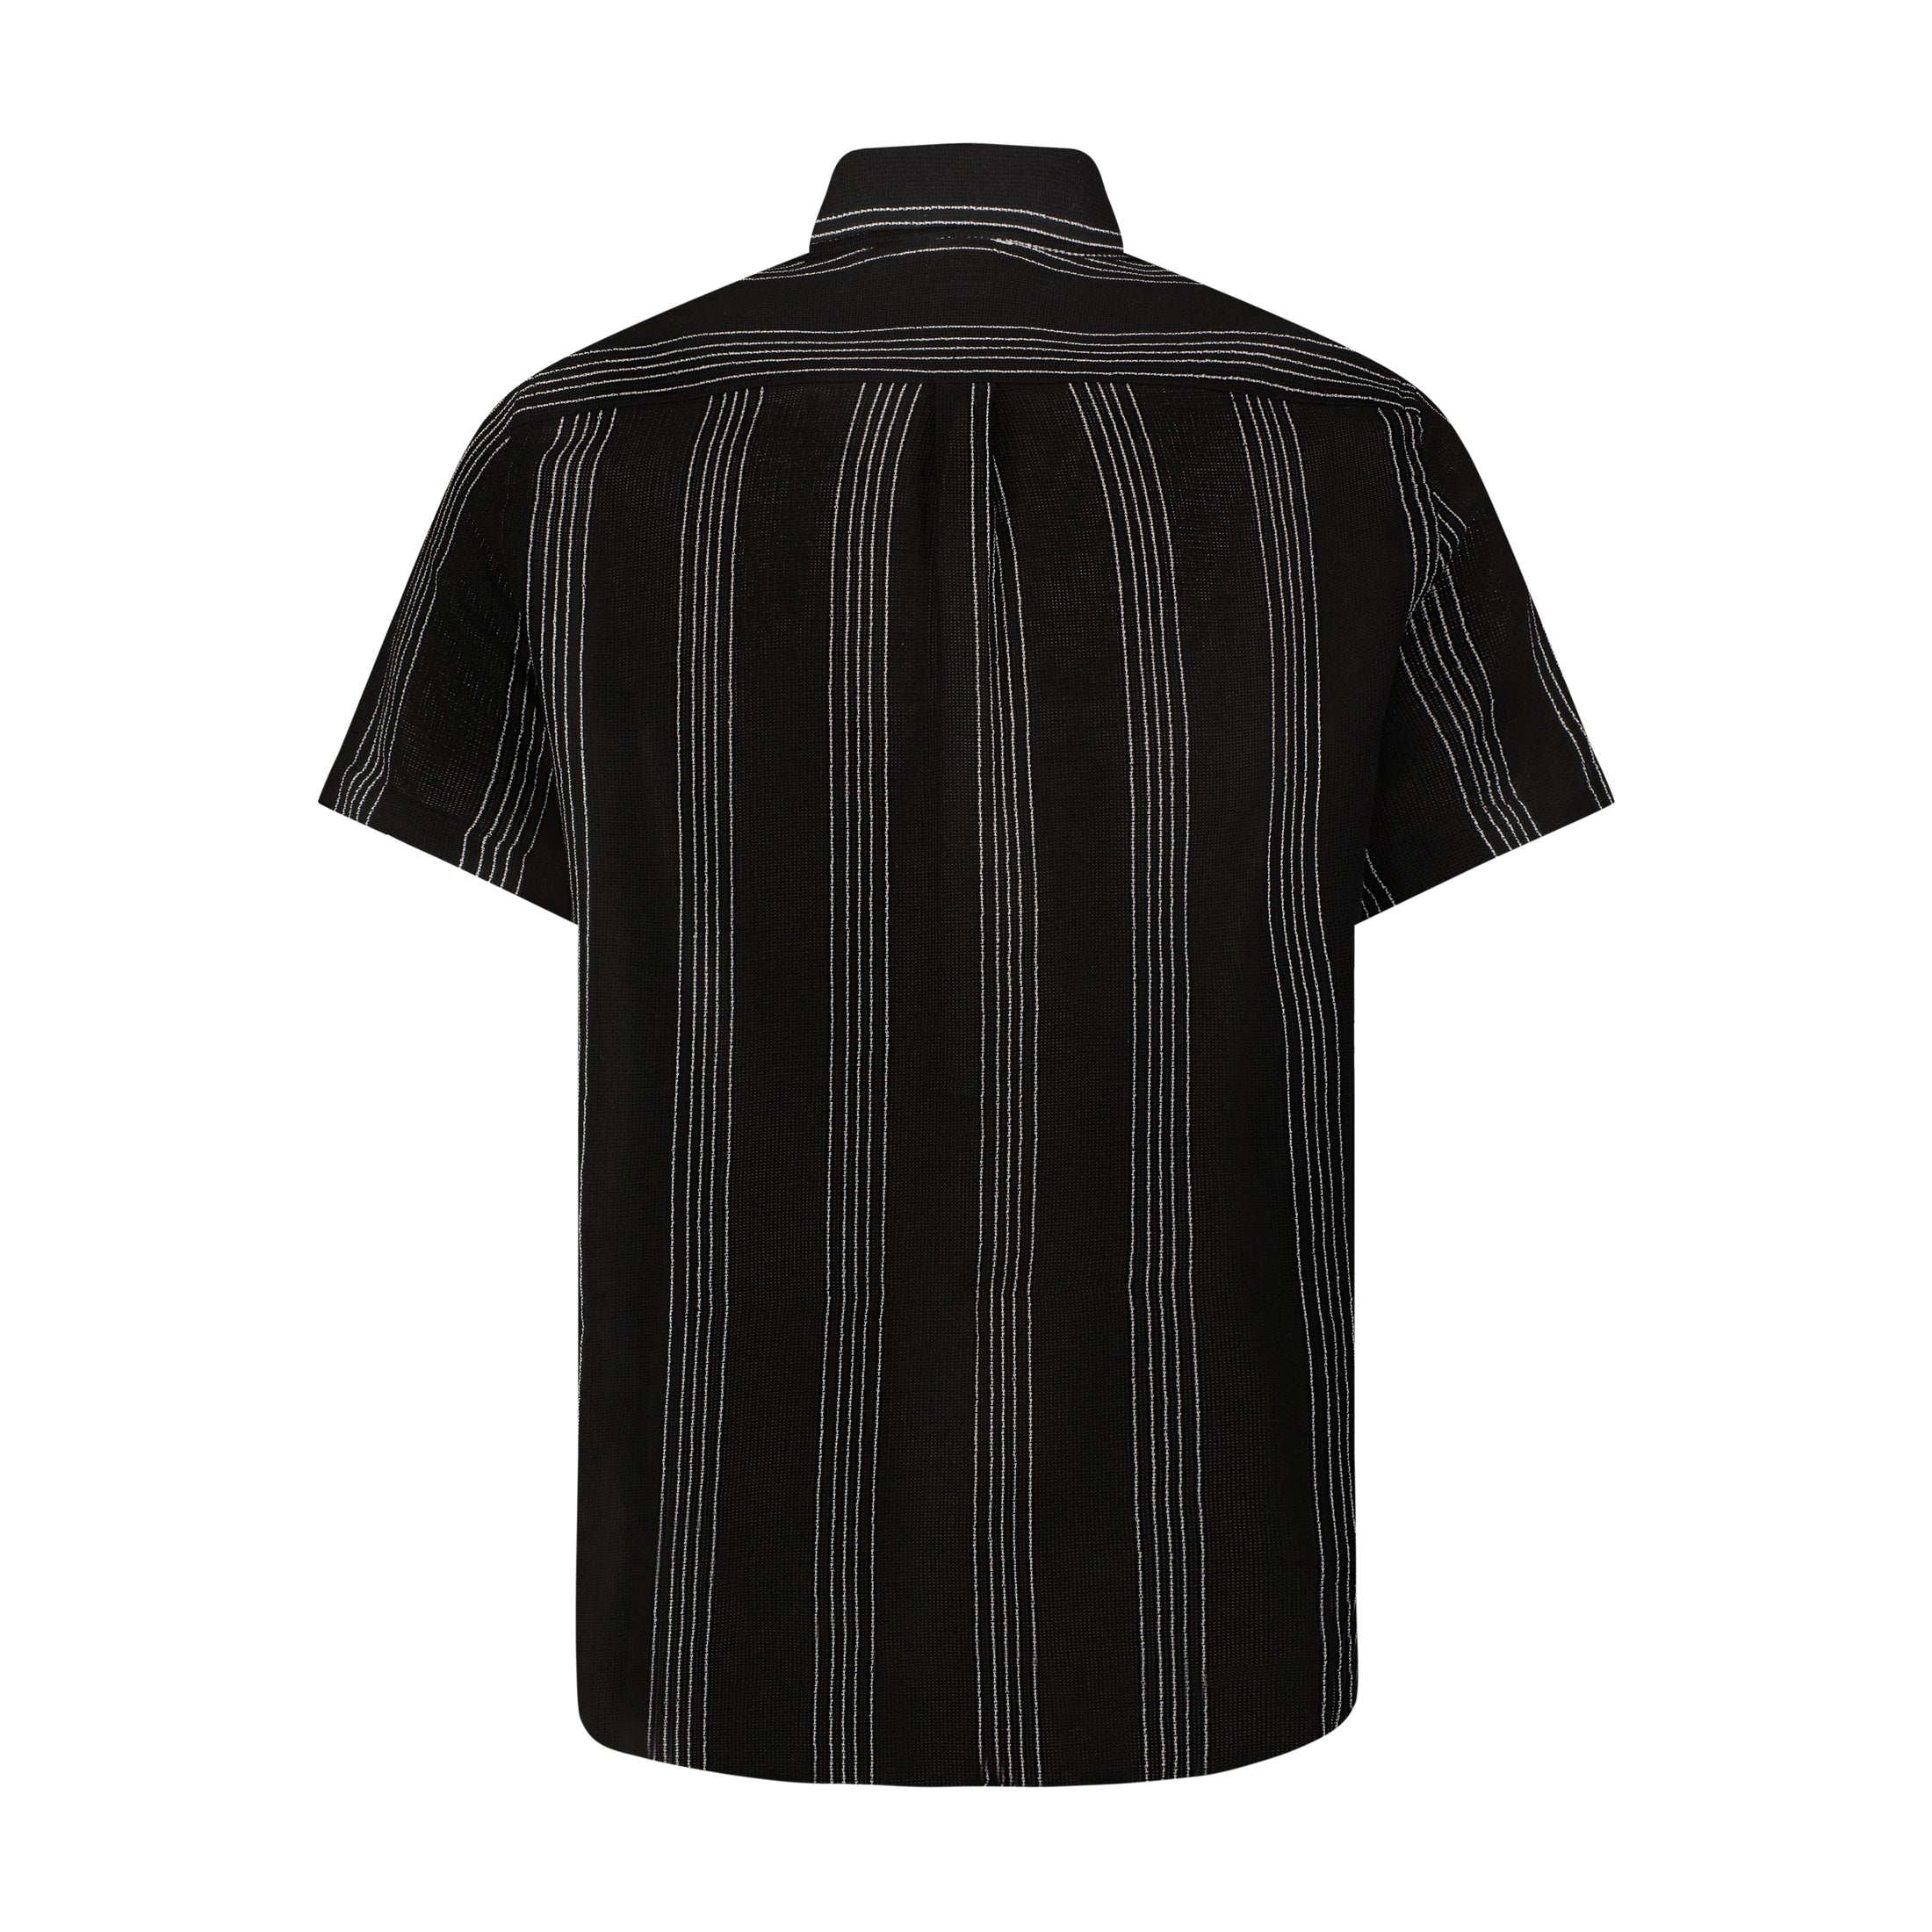 Black with White Striped Short Sleeve Embroidered Shirt